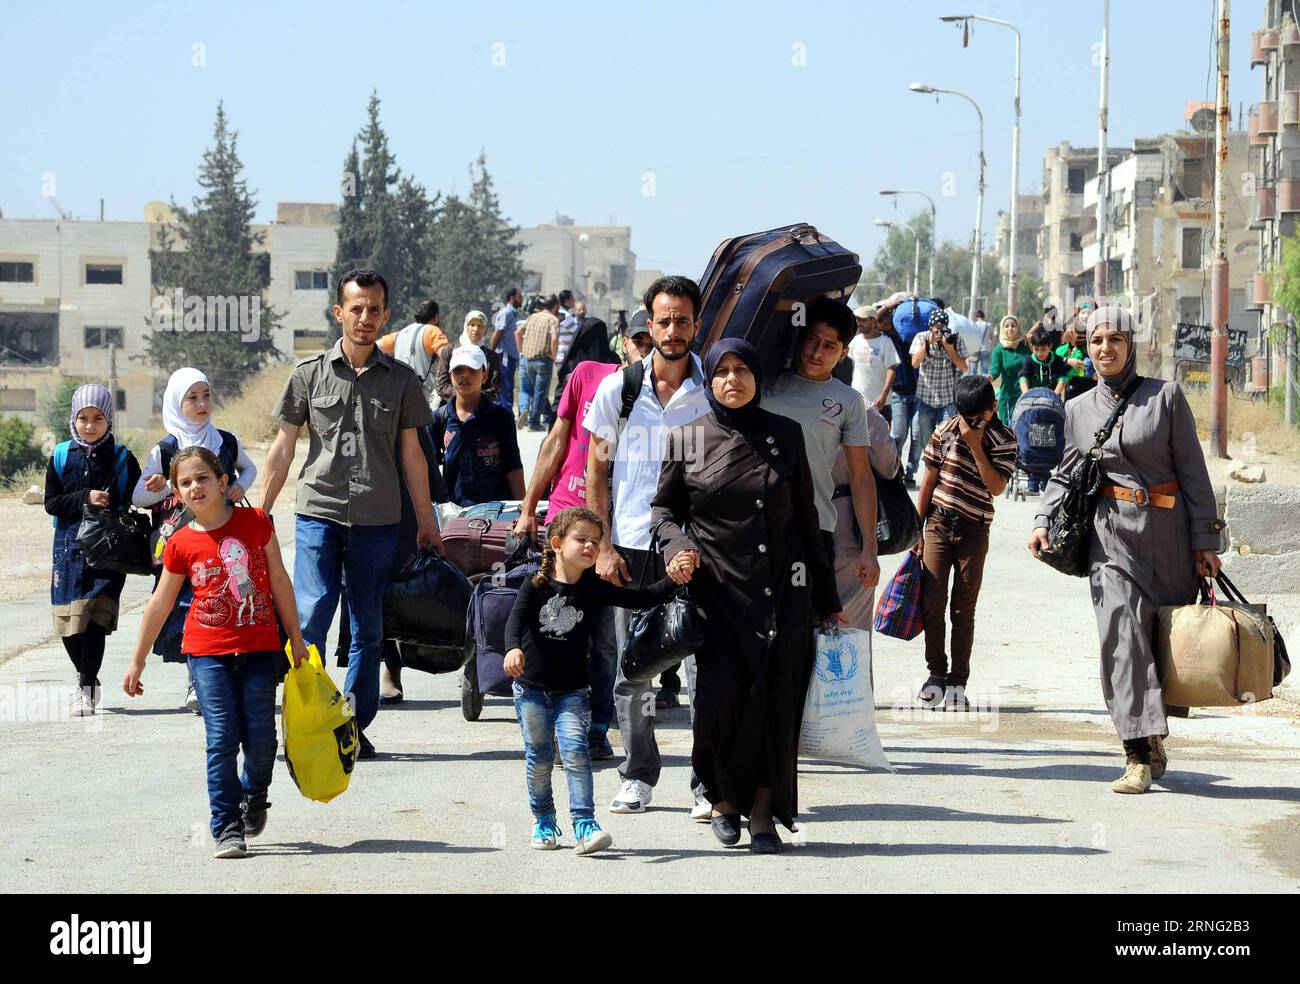 Bilder des Tages Syrien: Menschen flüchten aus Muadamiyeh bei Damaskus (160902) -- DAMASCUS, Sept. 2, 2016 -- Syrian civilians carry their belongings to evacuate from the rebel-held town of Muadamiyeh, in rural Damascus, capital of Syria, on Sept. 2, 2016. Nearly 300 civilians, who were originally from the town of Daraya for refuge, were evacuated from Muadamiyeh to government-controlled shelters in southern Damascus. SYRIA-DAMASCUS-CIVILIANS-EVACUATE-REBEL-HELD-TOWN Ammar PUBLICATIONxNOTxINxCHN   Images the Day Syria People flee out  at Damascus 160902 Damascus Sept 2 2016 Syrian civilians Ca Stock Photo